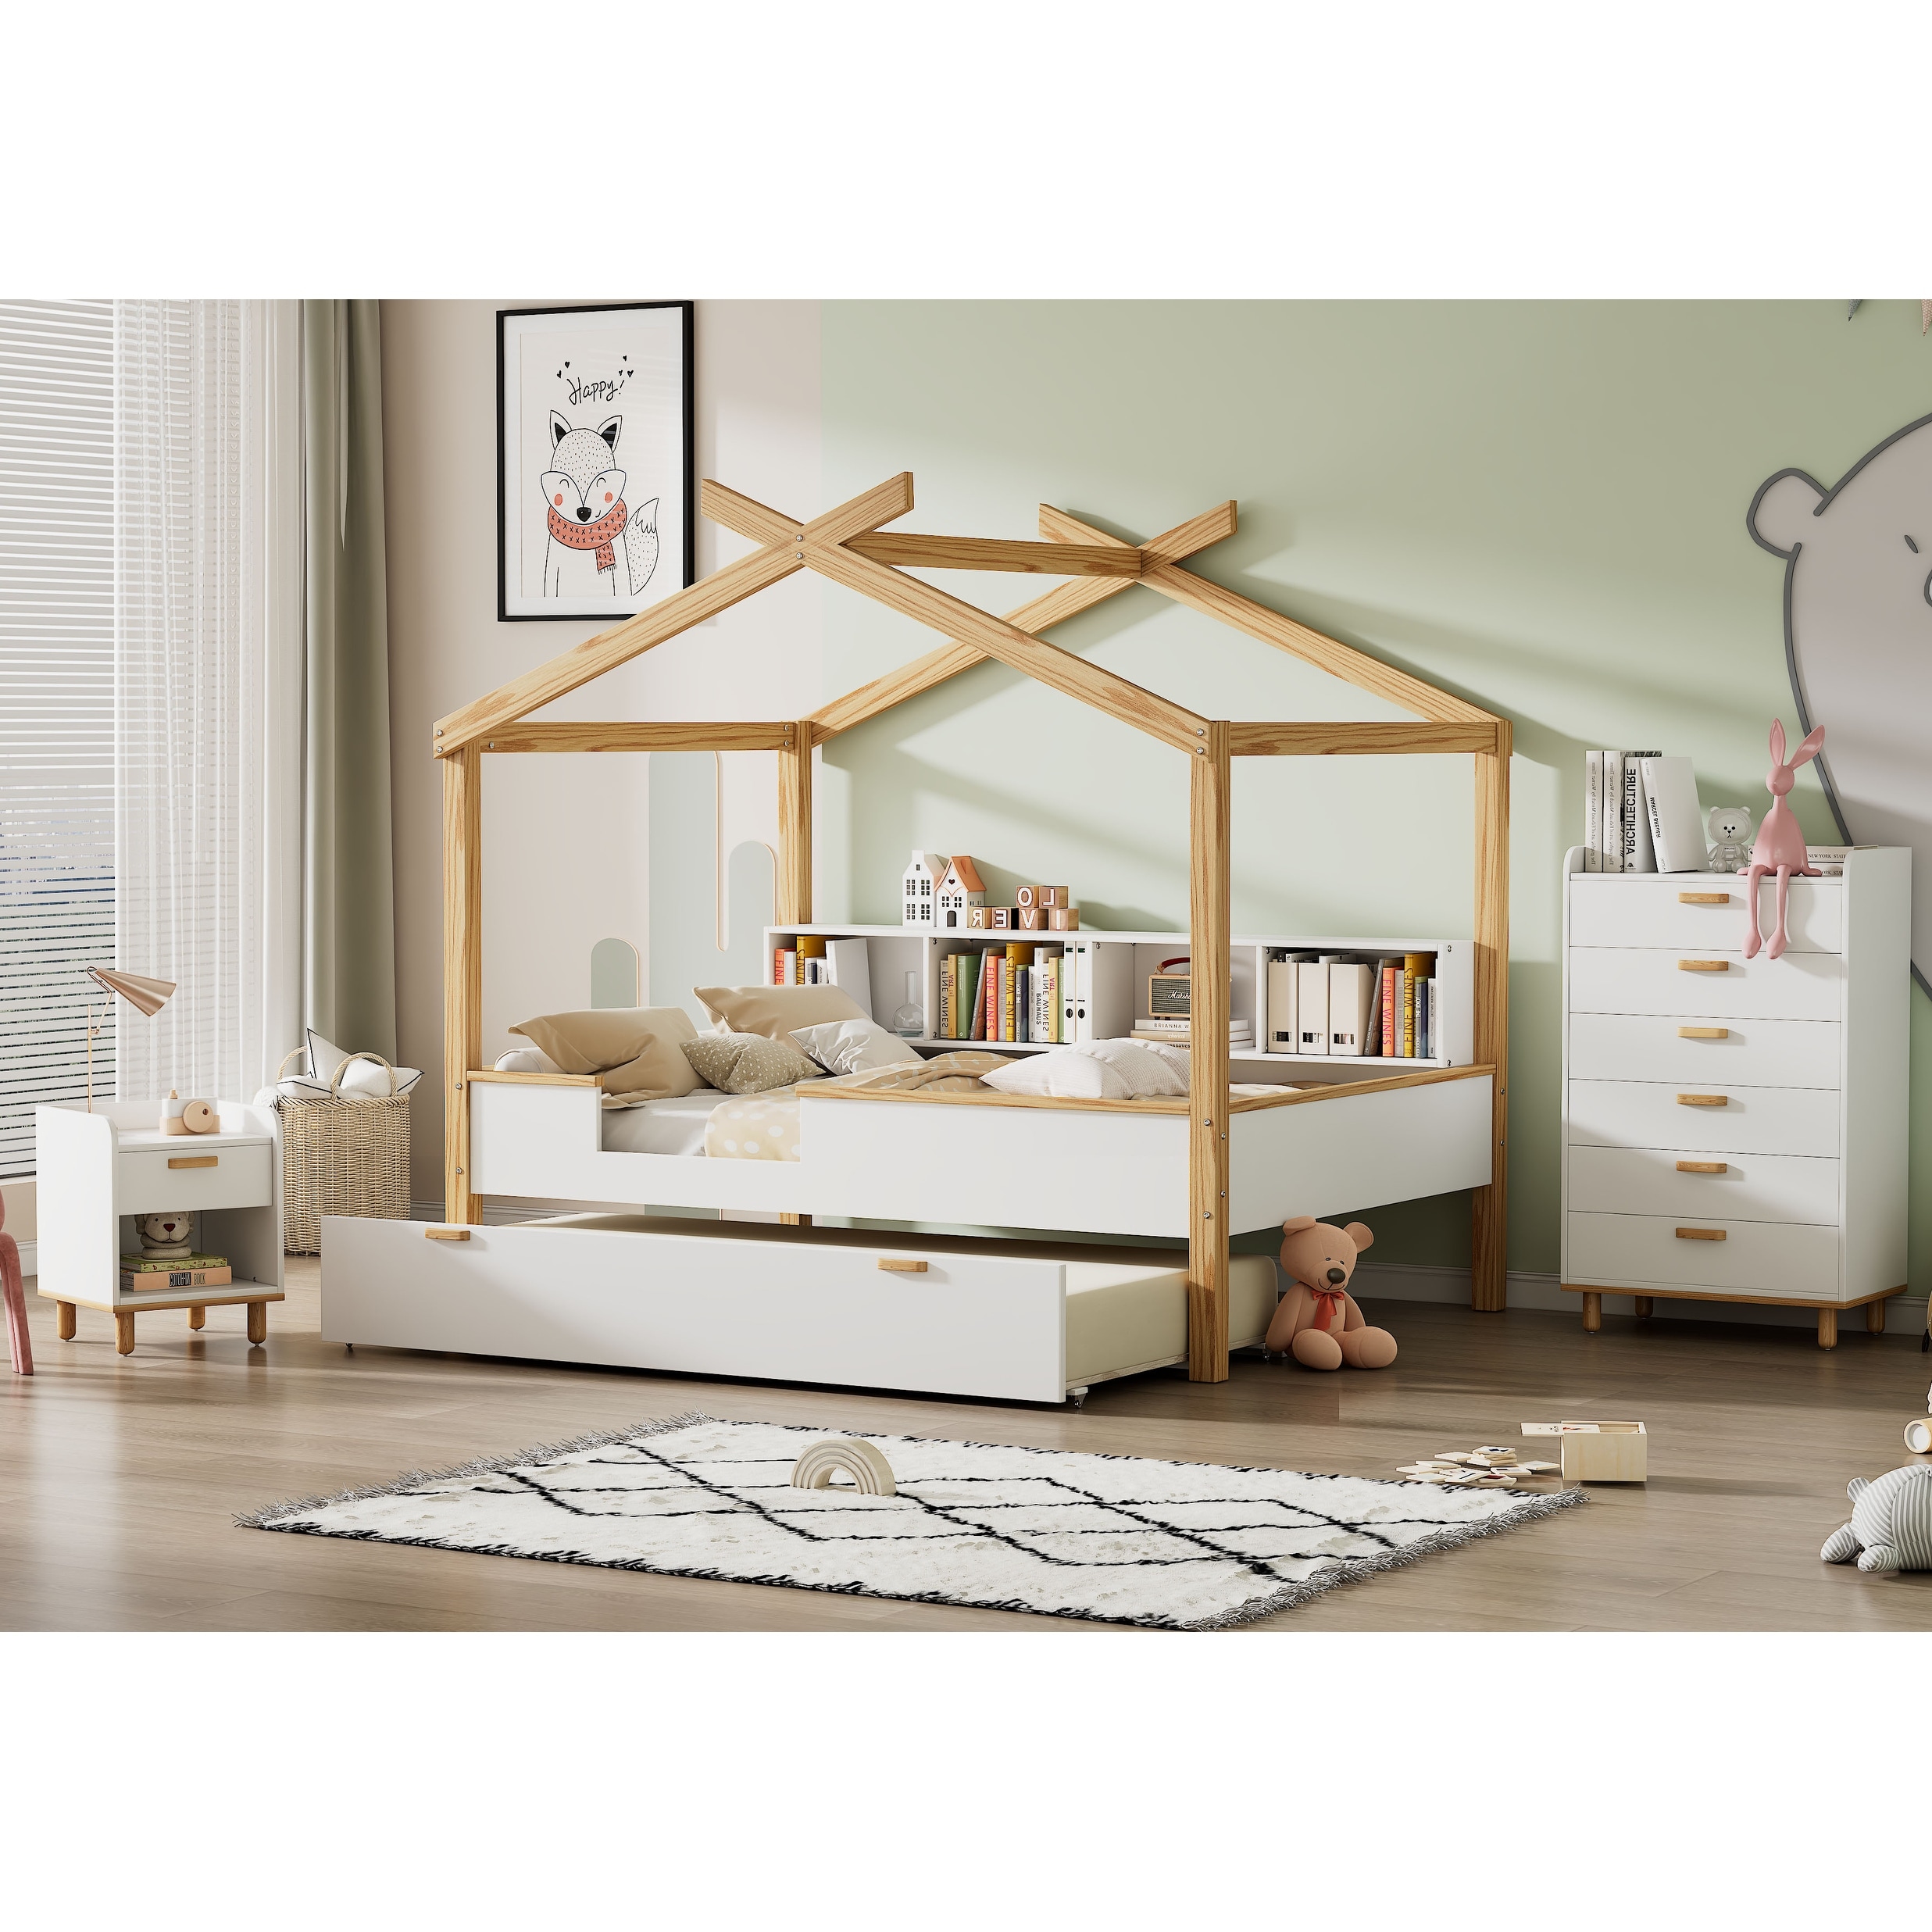 3 Piece Bedroom Set  Modern Full Size House-shape Bed  Wooden Children Trundle Bed  6-drawer Storage Chest And Nightstand